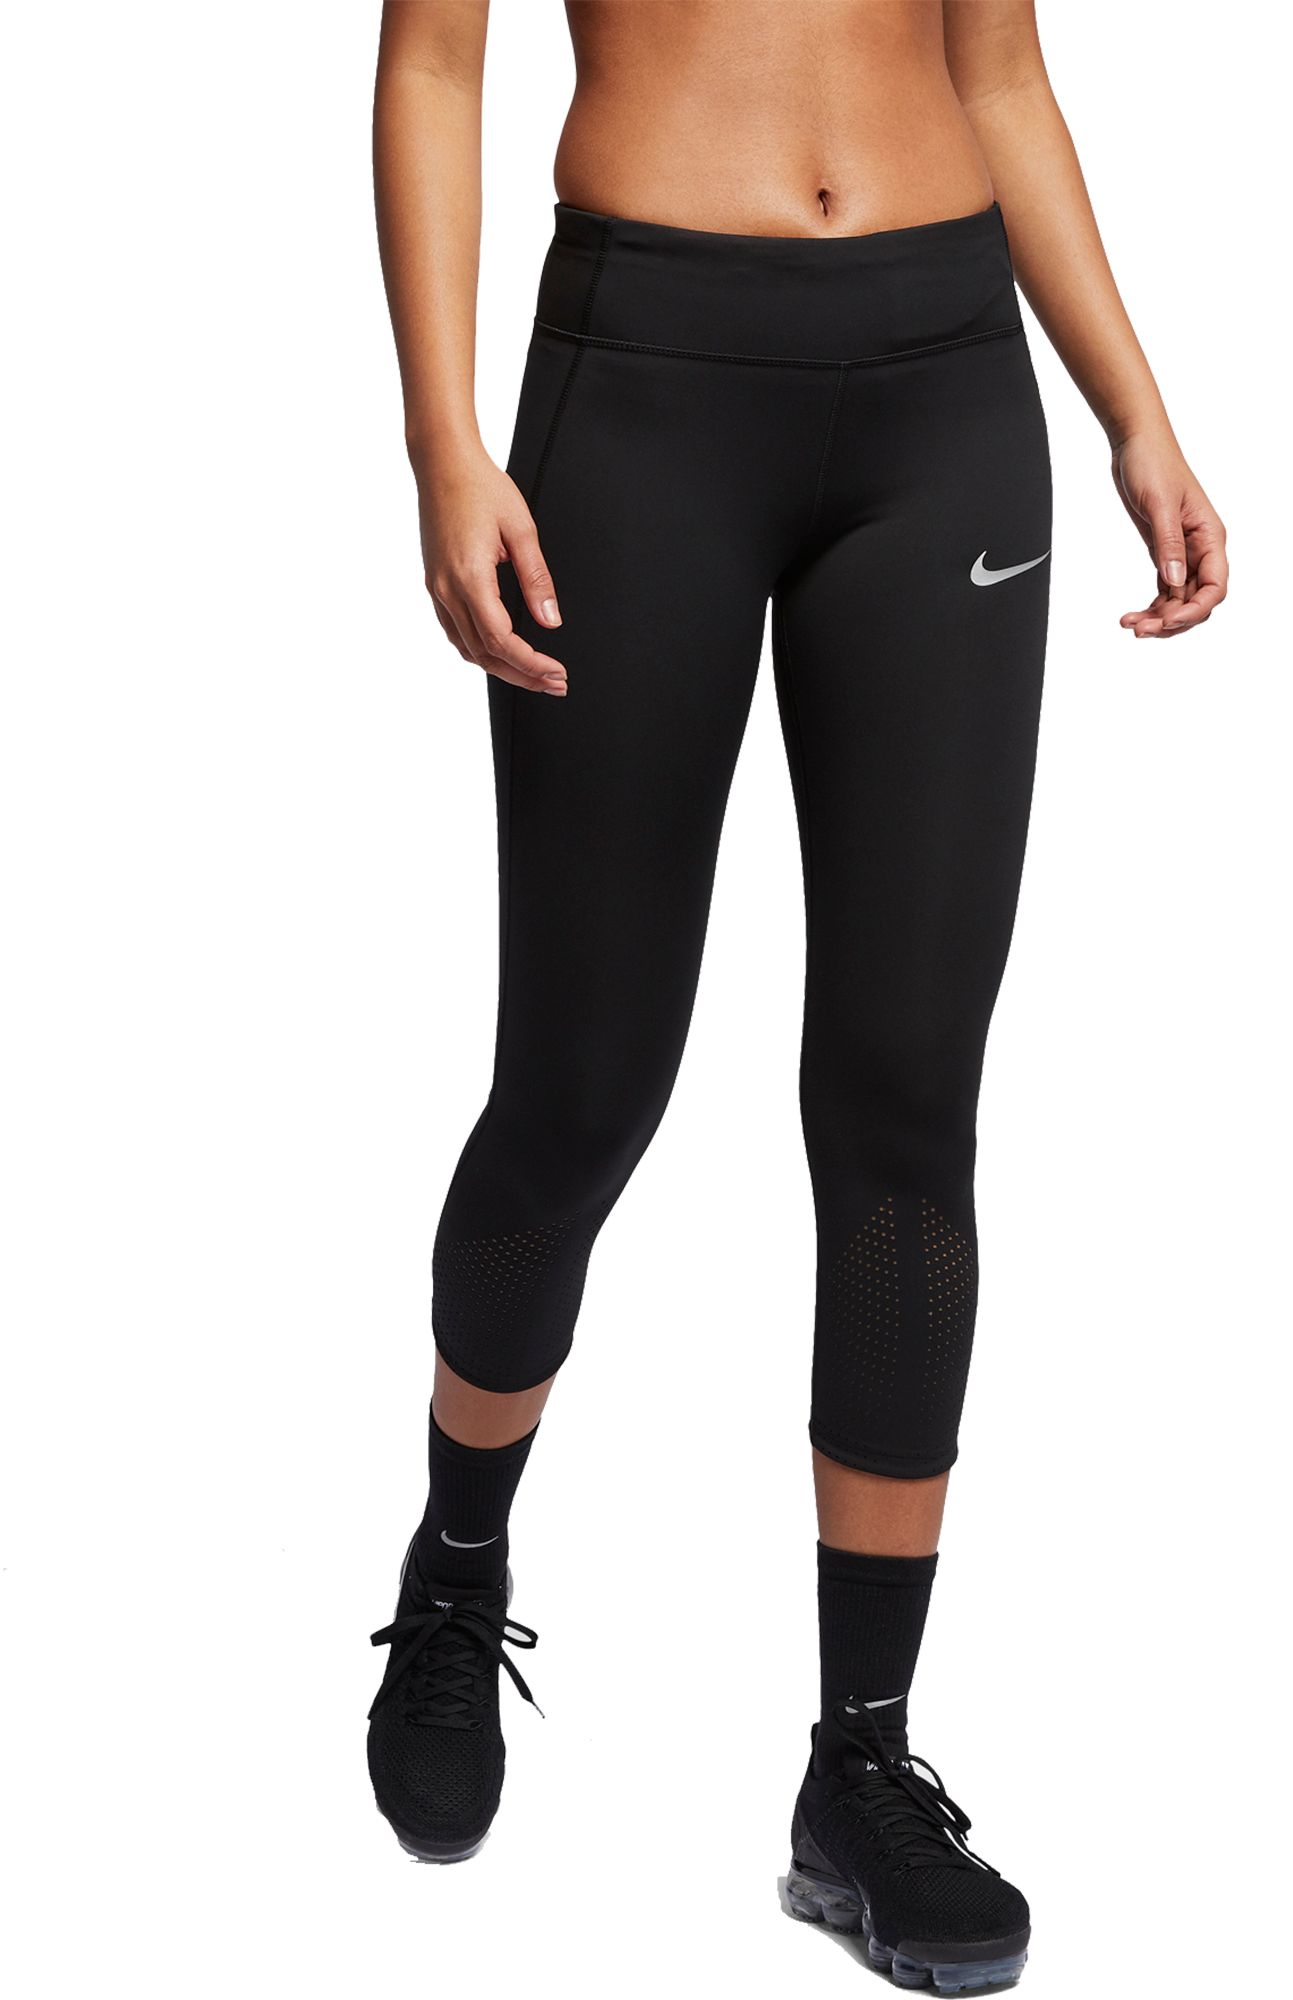 nike epic lux tights review